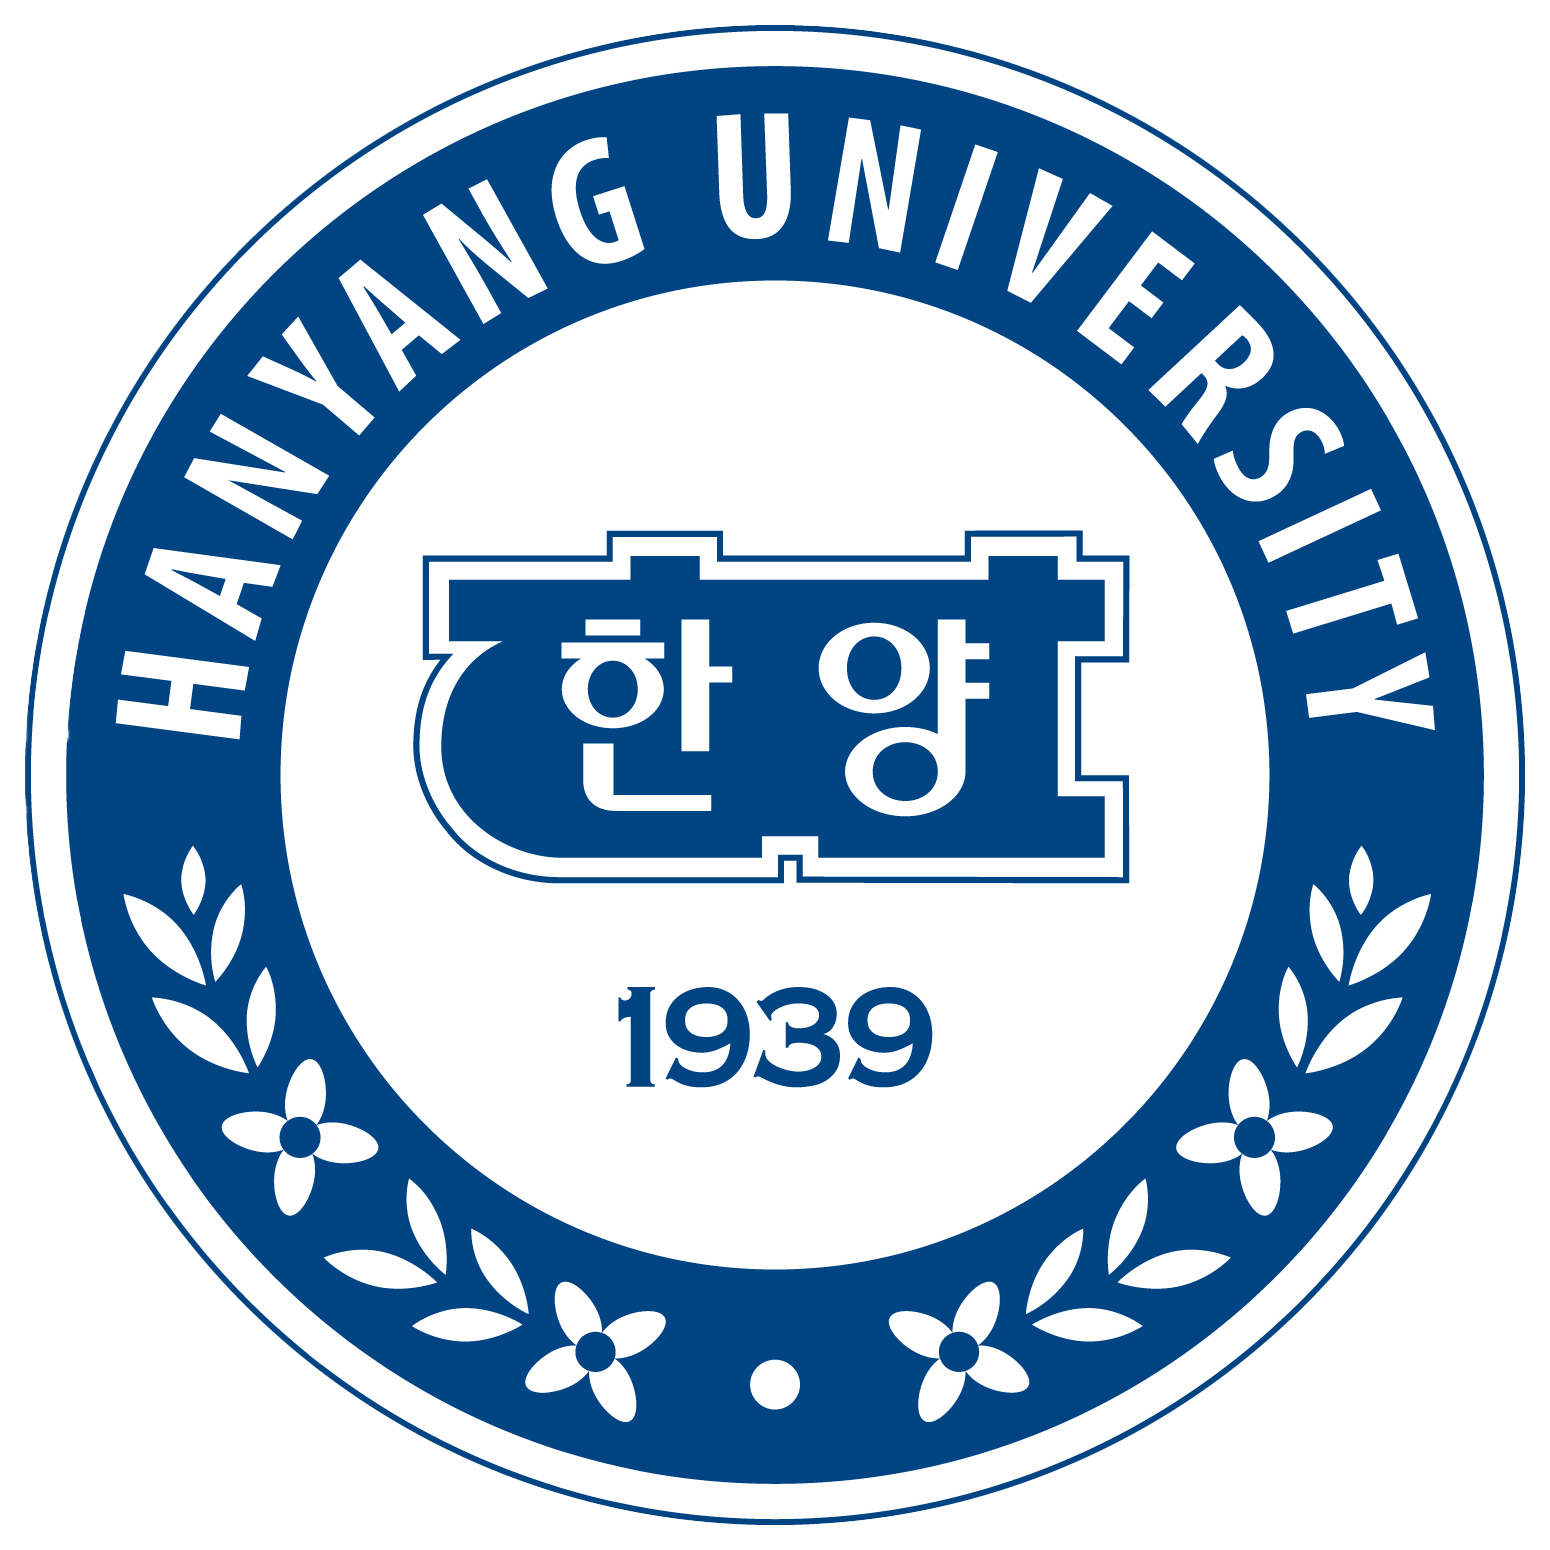 Hanyang University Foreign Student Admission Factors_English Version 한양대 외국인전형 전형방법_영어본_00.png